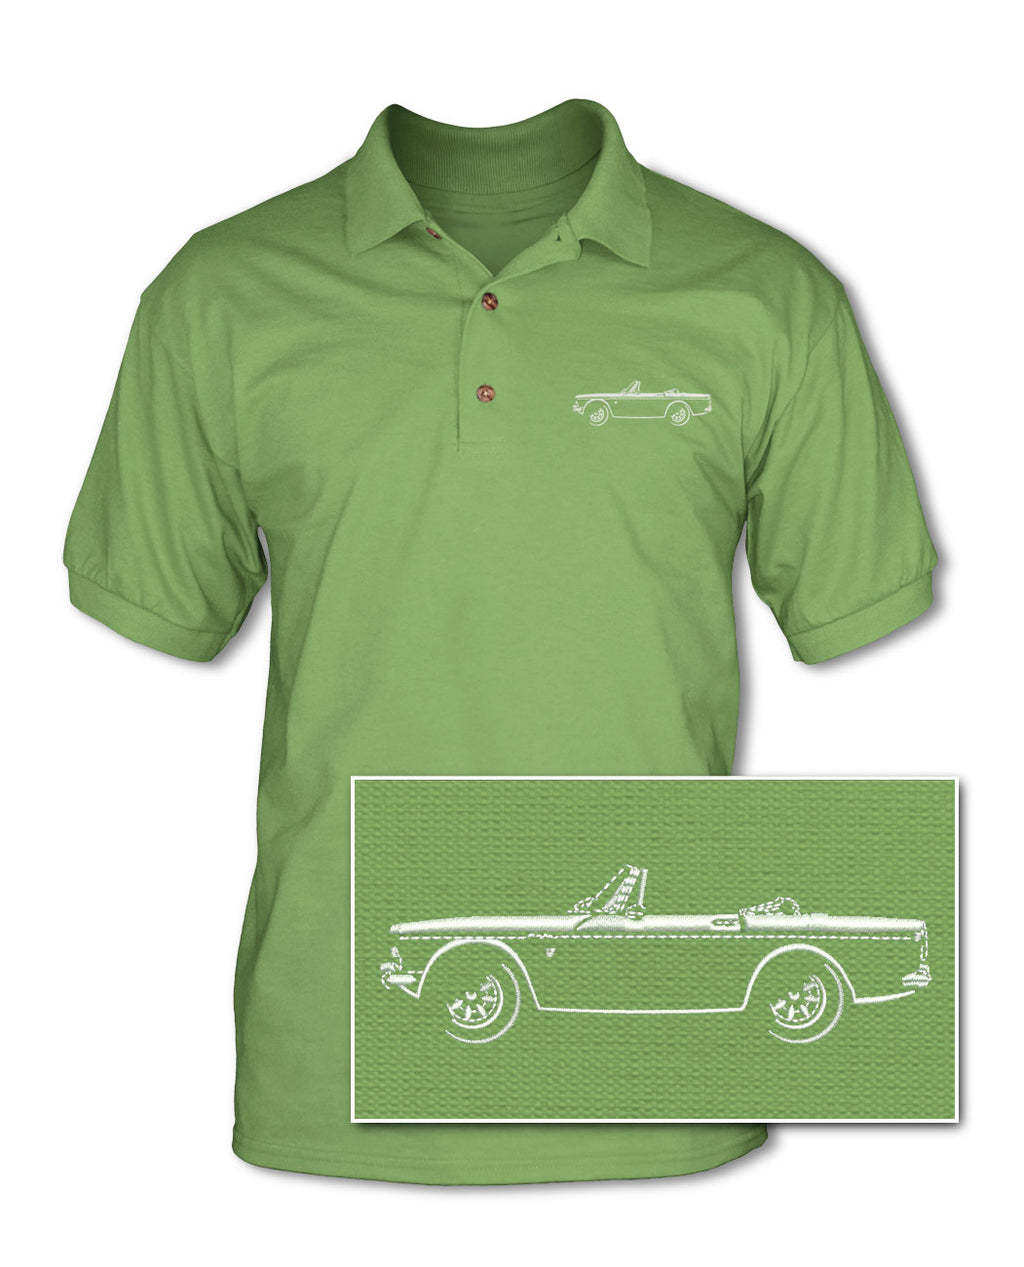 Sunbeam Tiger Convertible Adult Pique Polo Shirt - Side View